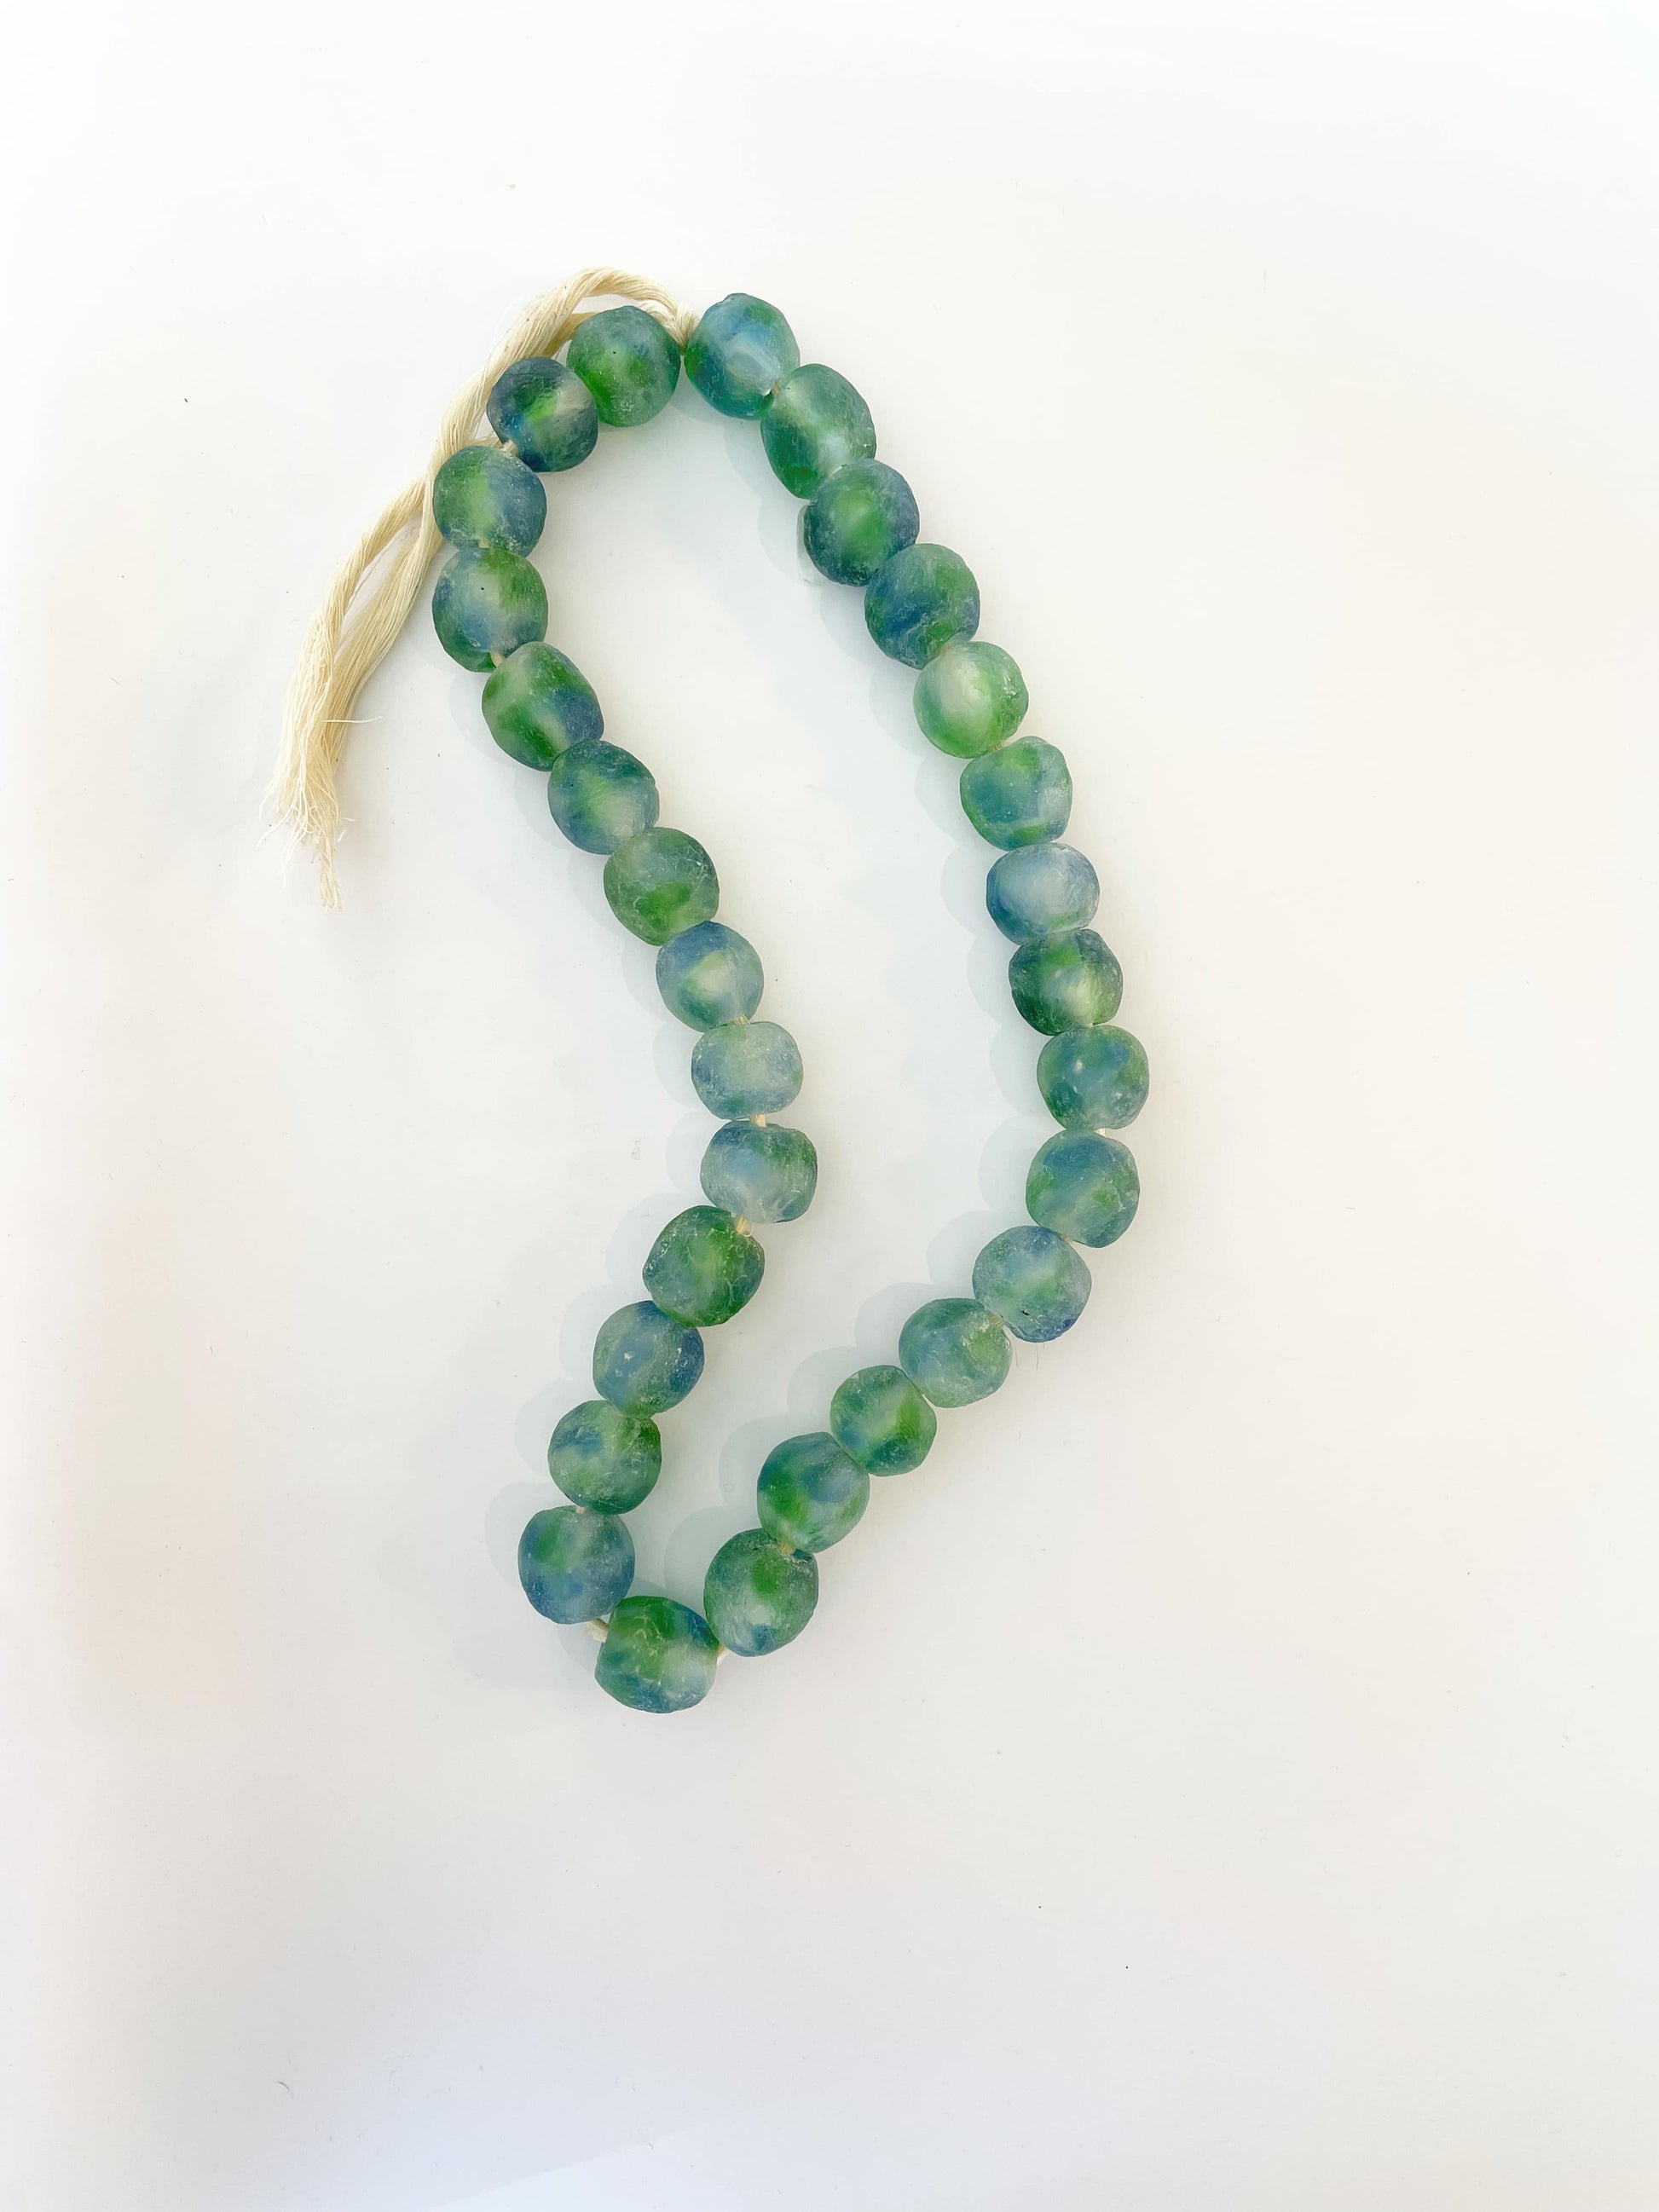 Recycled glass beads in green